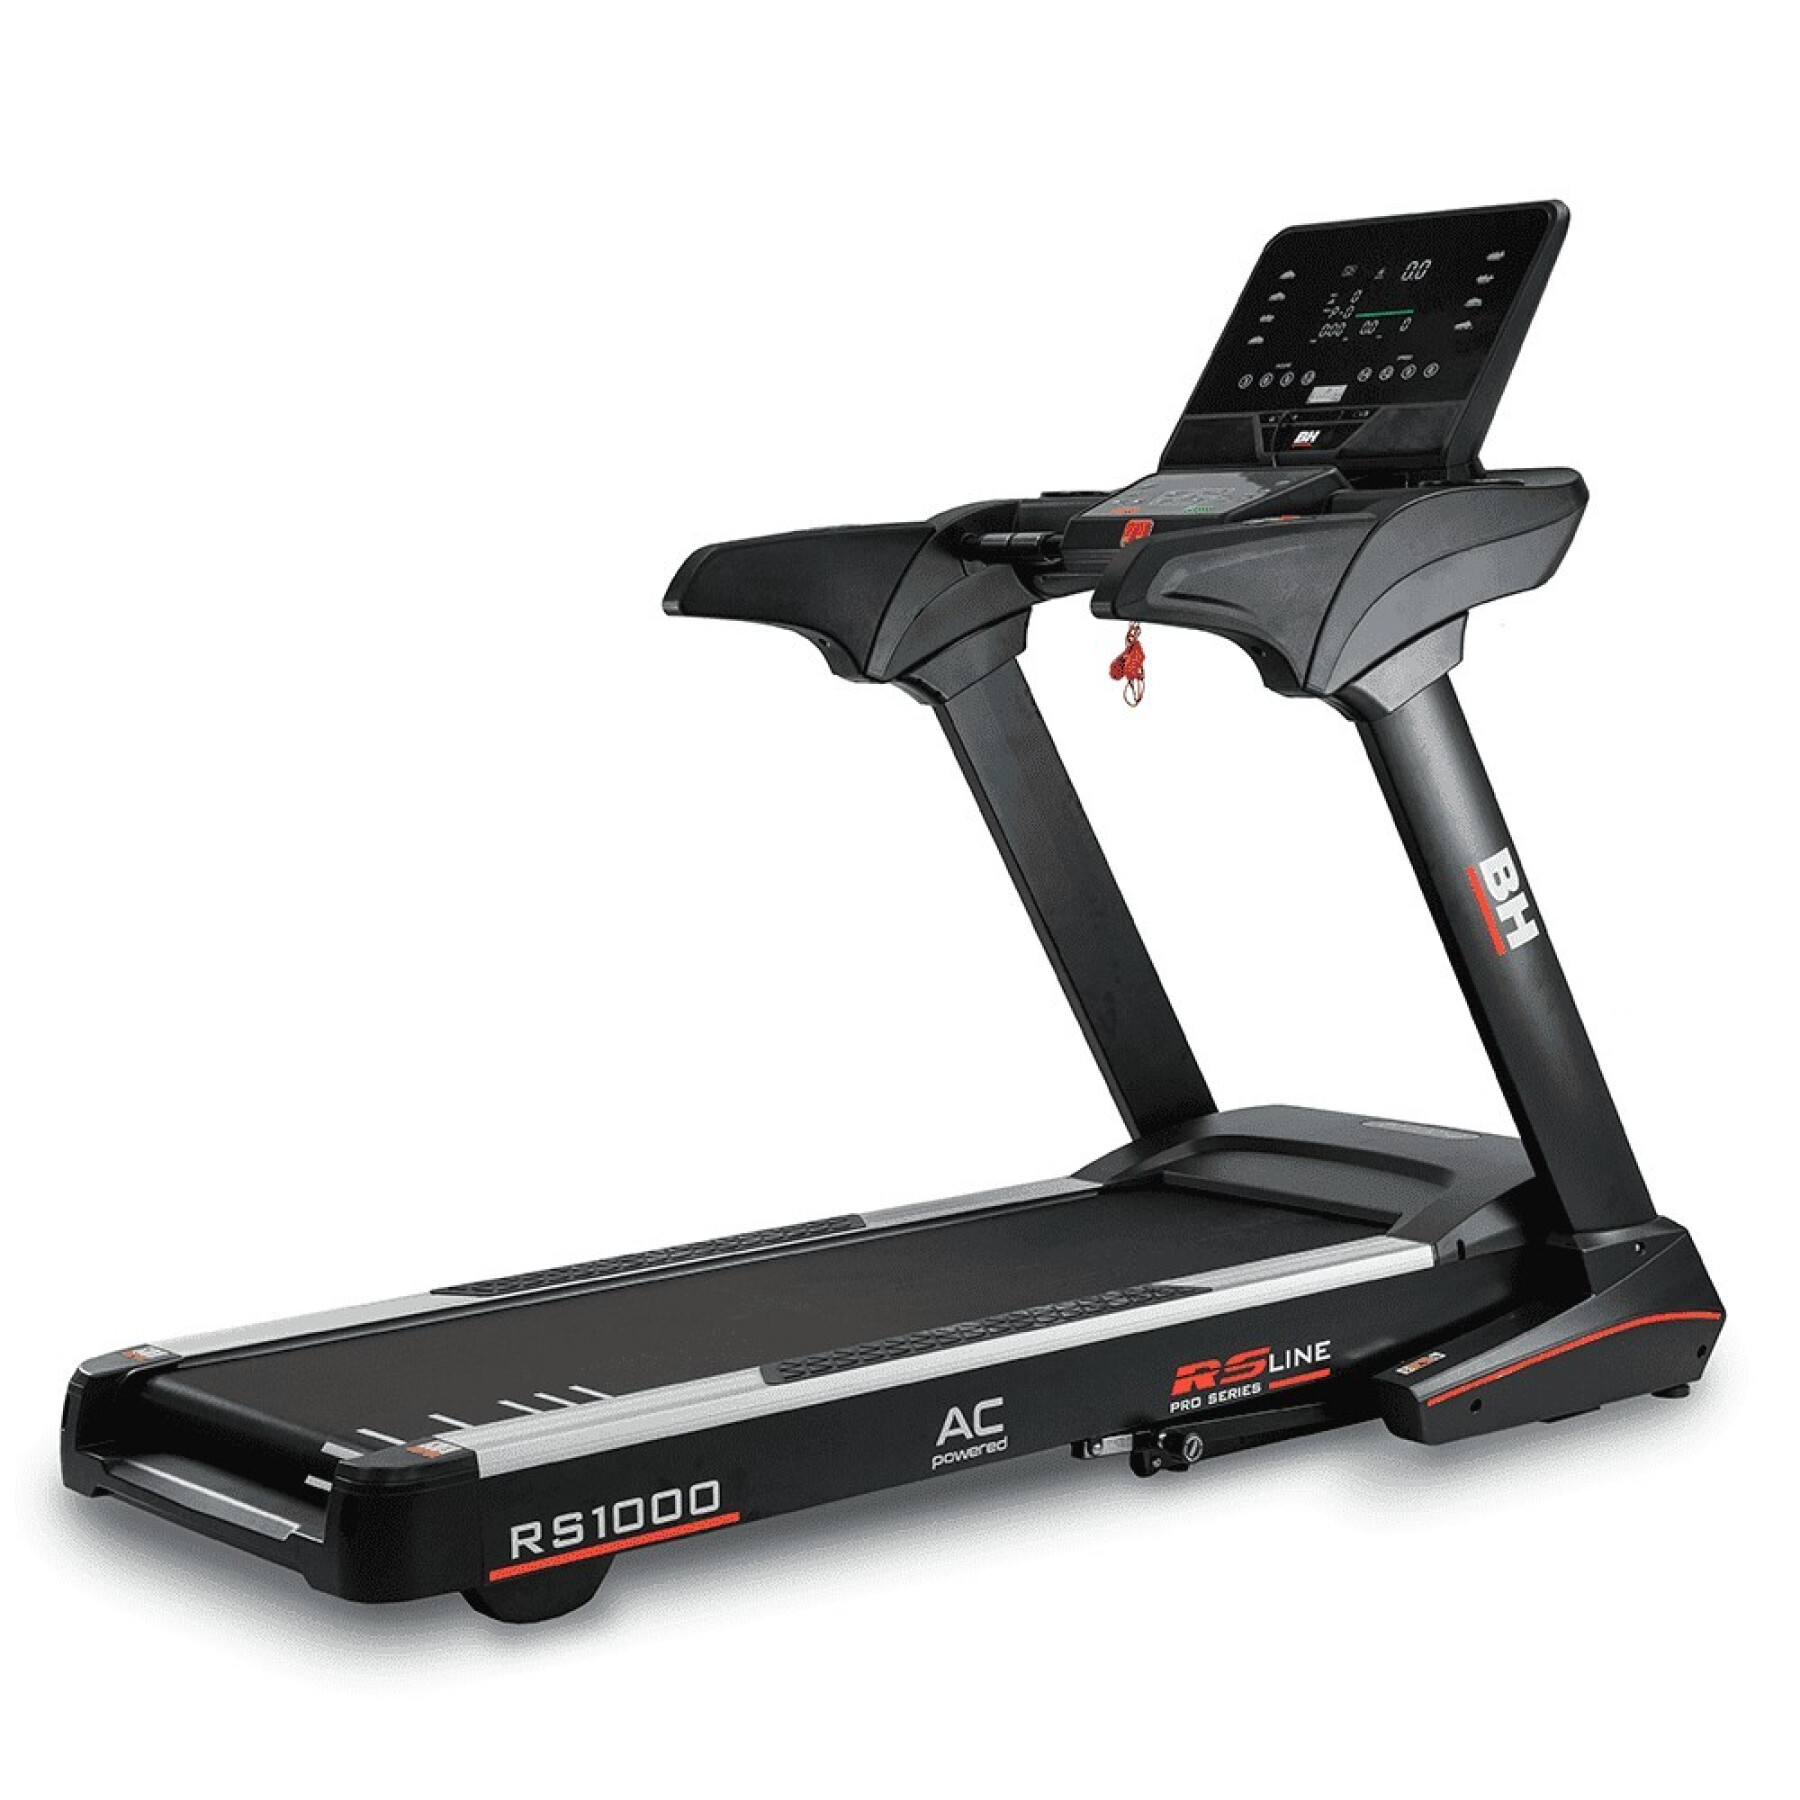 Bh Fitness Commercial Treadmill 3.5hp - Model RS1000